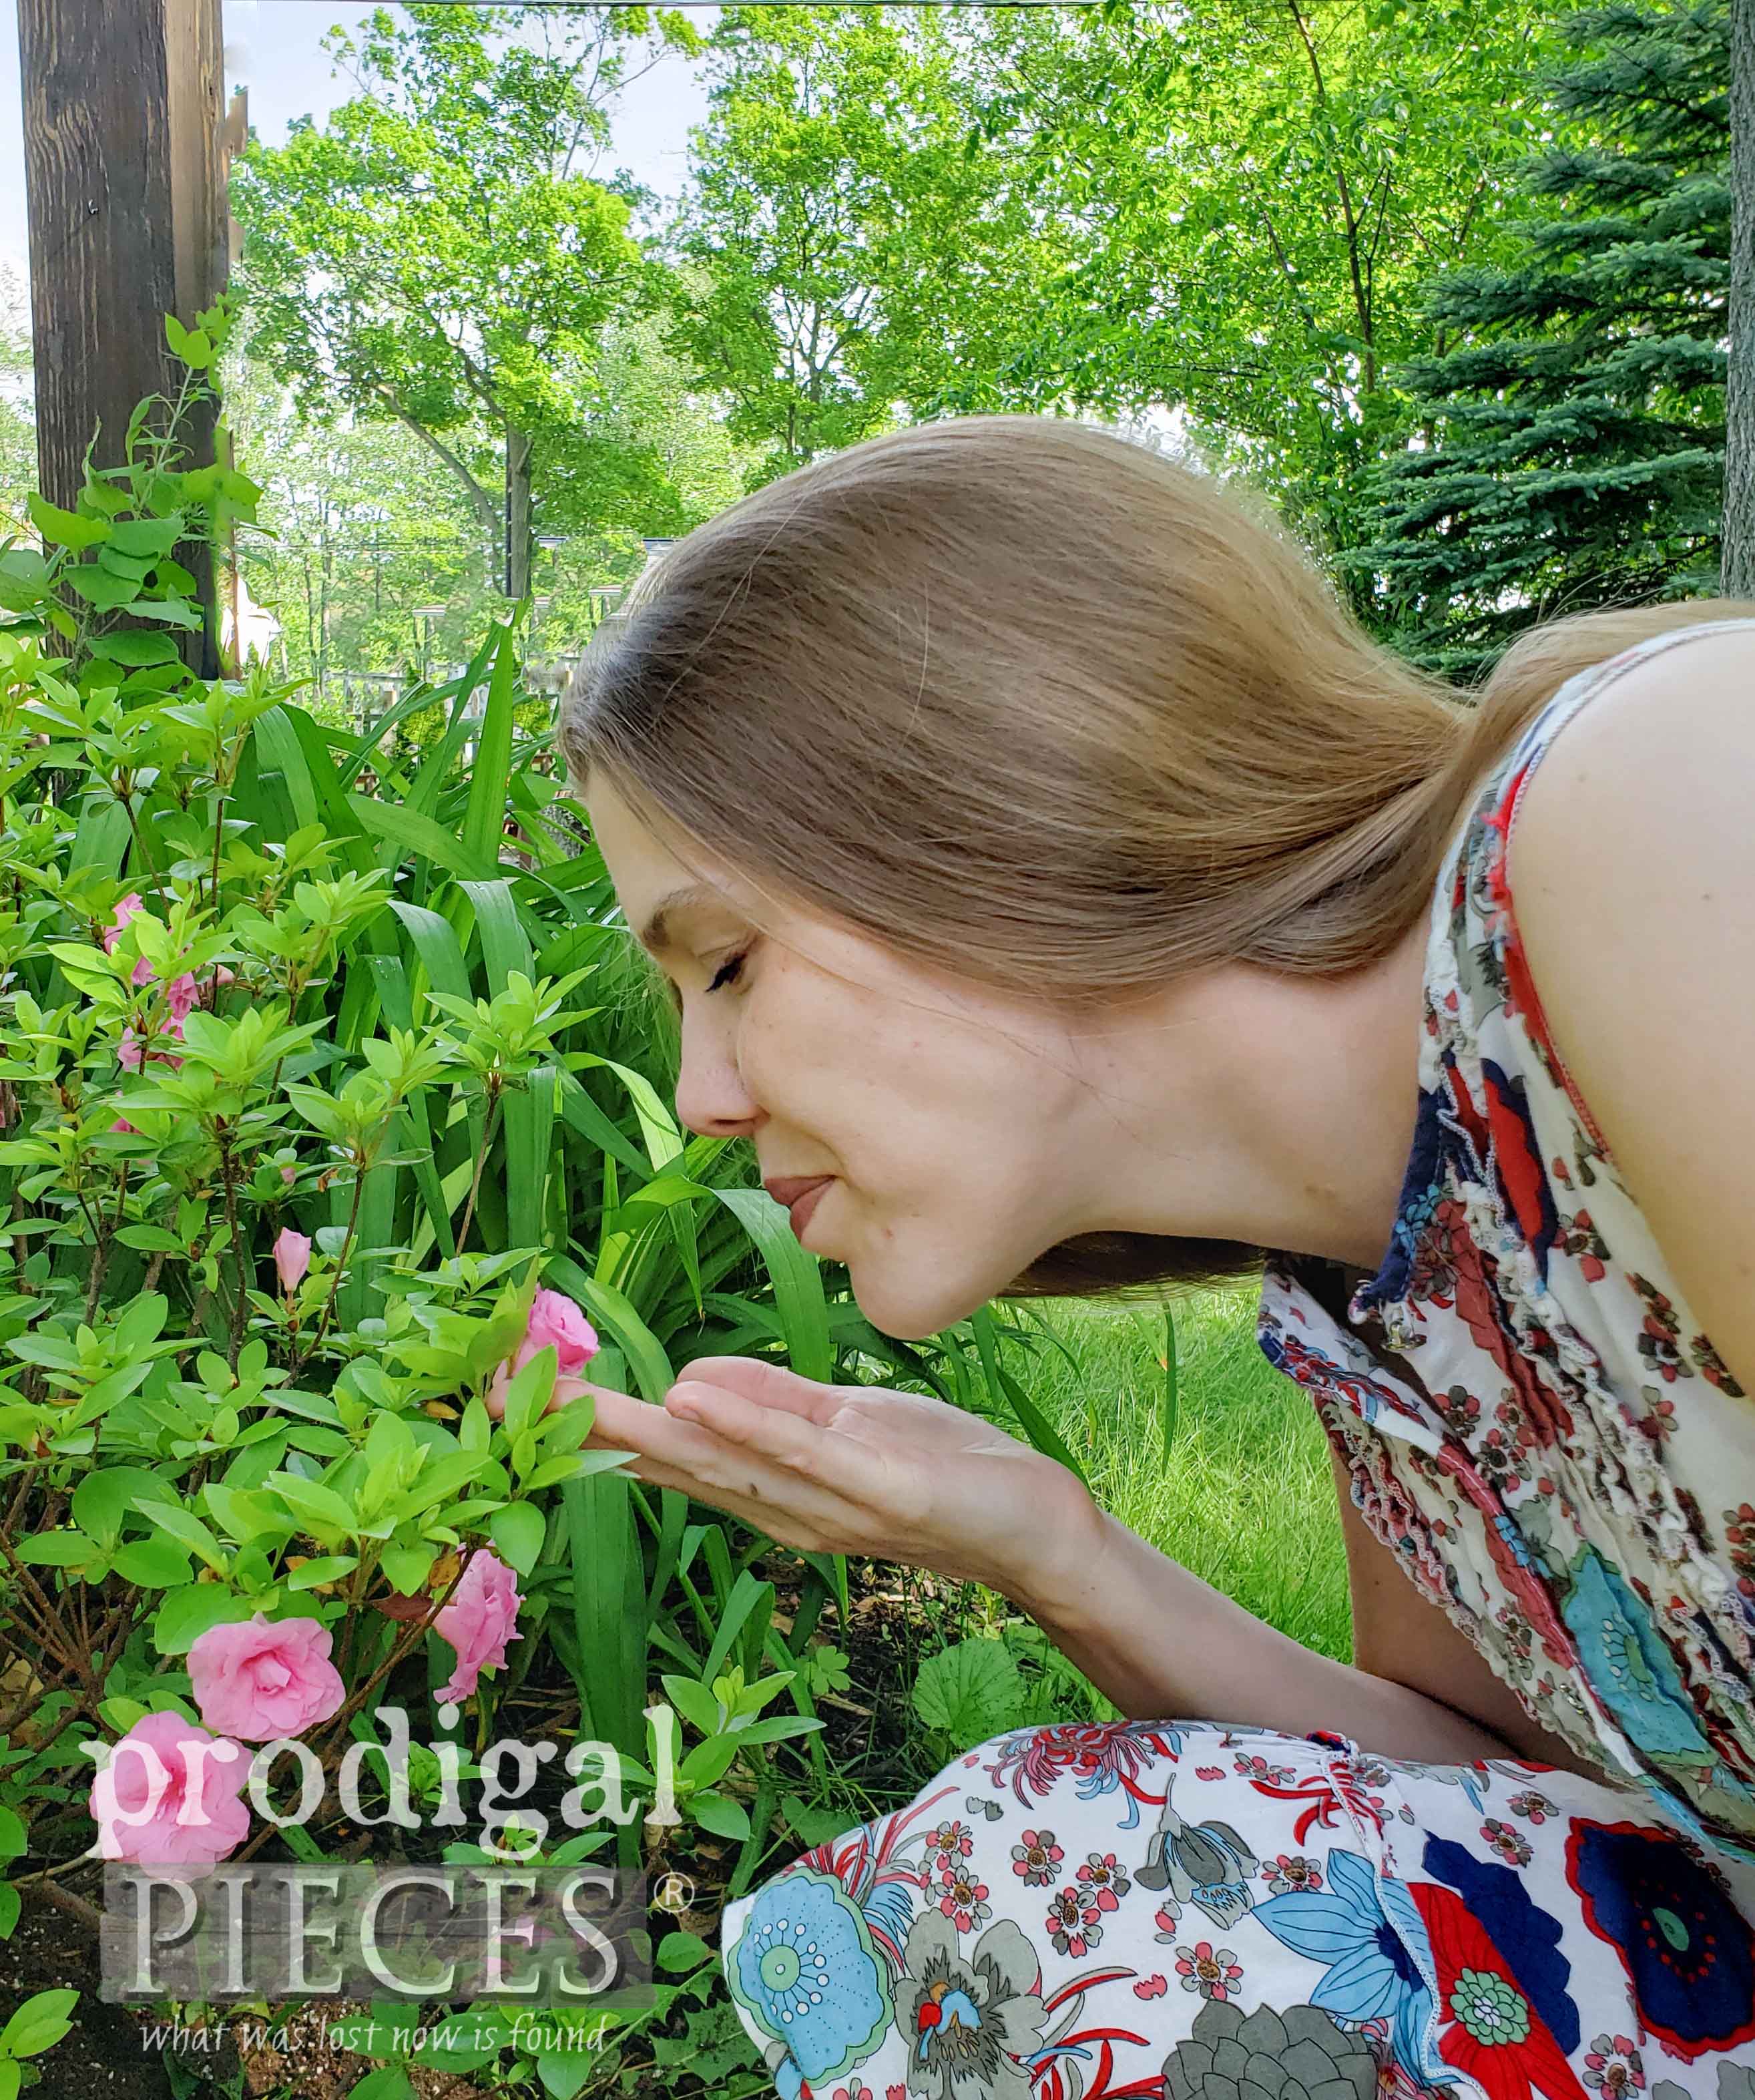 Smelling Rose Bud Azalea | Focusing on the important things in life | prodigalpieces.com #prodigalpieces #midlife #health #happiness #women